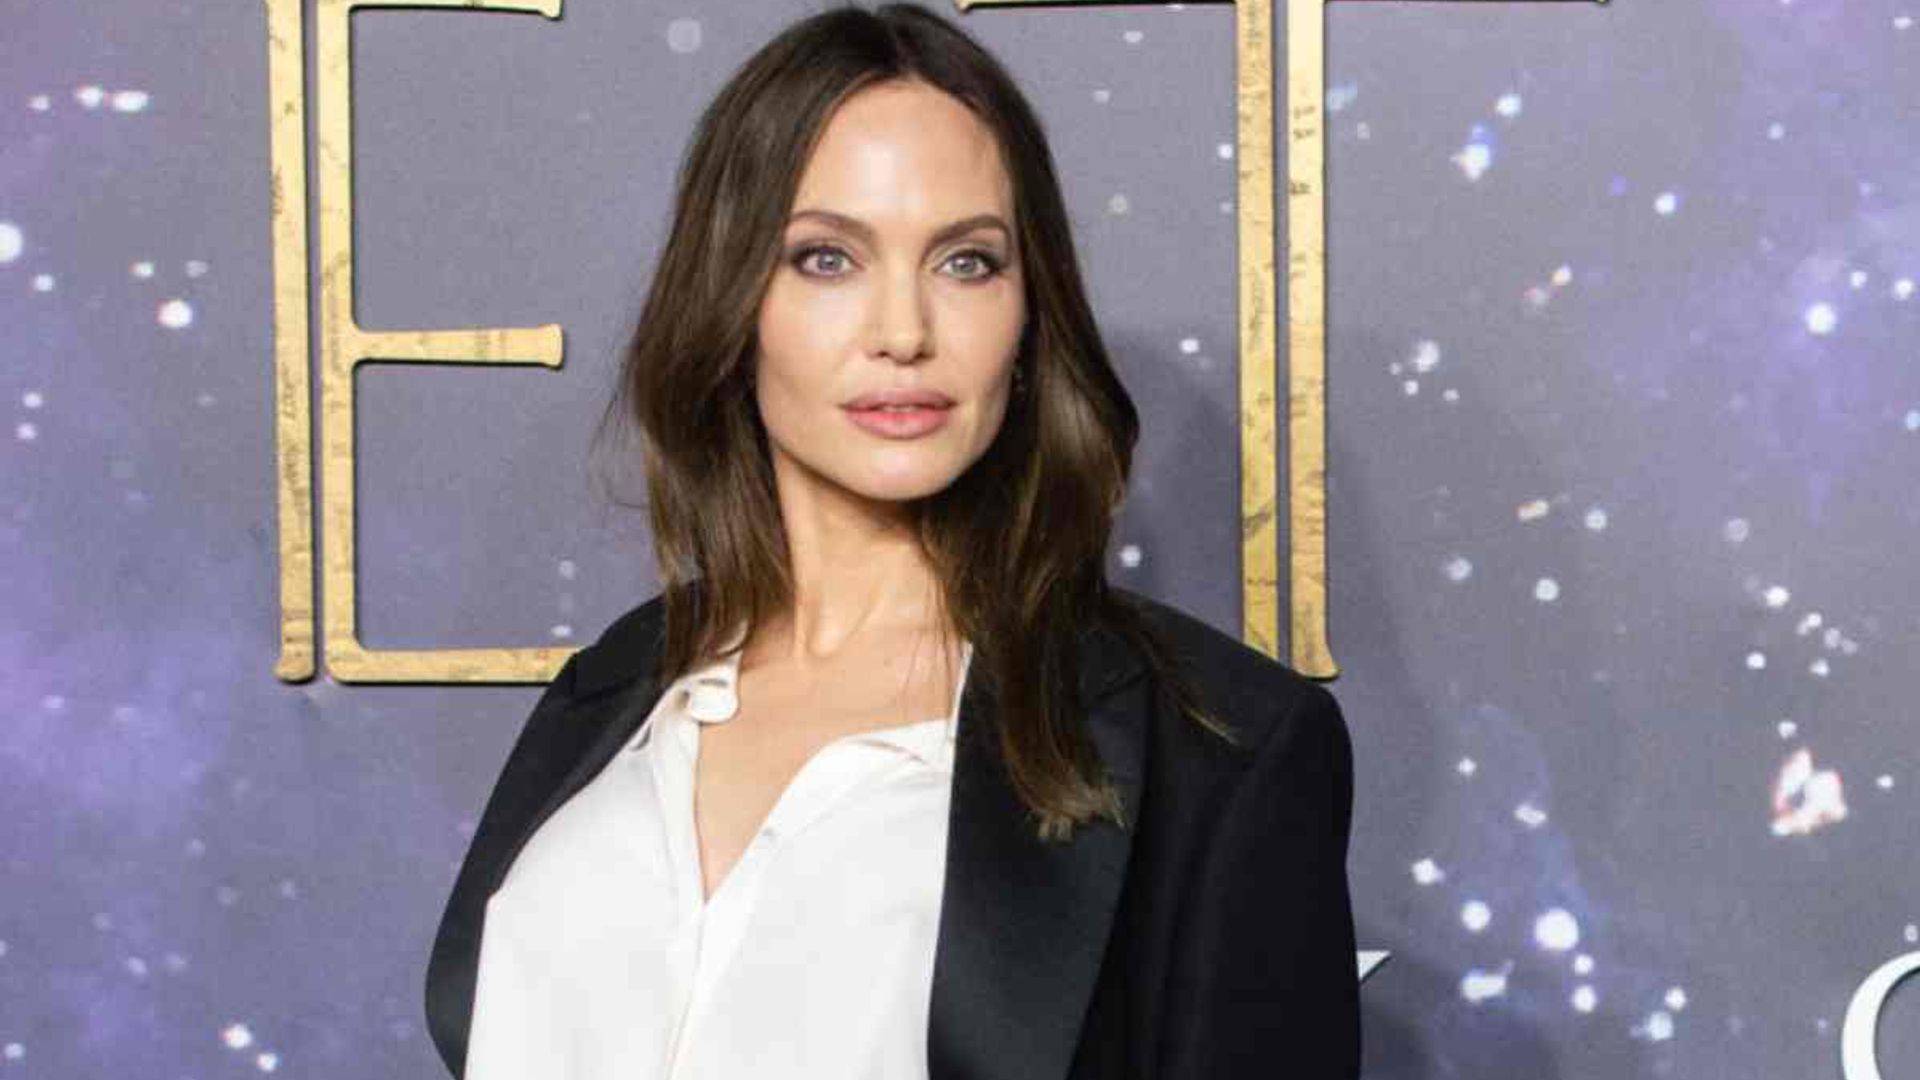 Angelina Jolie looks identical to daughter Shiloh in stunning new photo